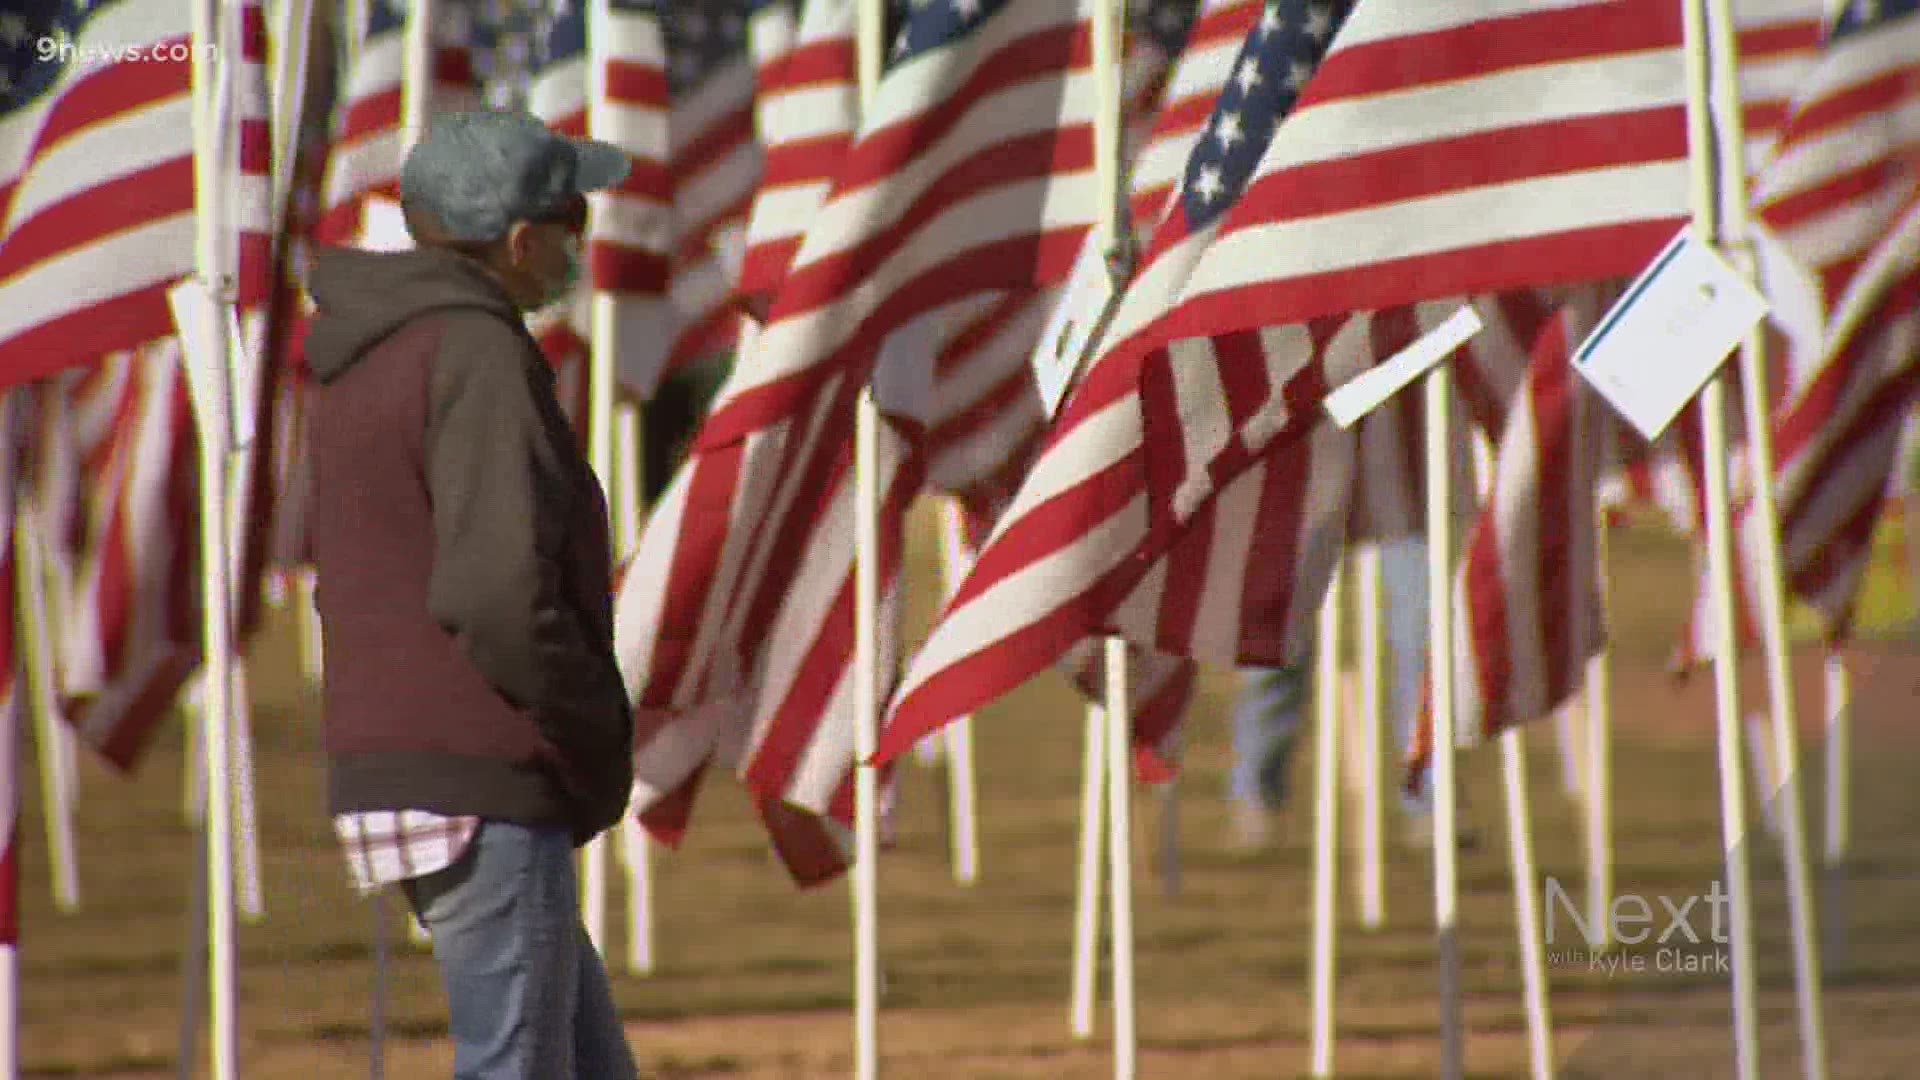 While it’s designed to celebrate veterans, the Field of Honor is also intended to recognize first responders who, organizers say, deserve praise for their sacrifice.